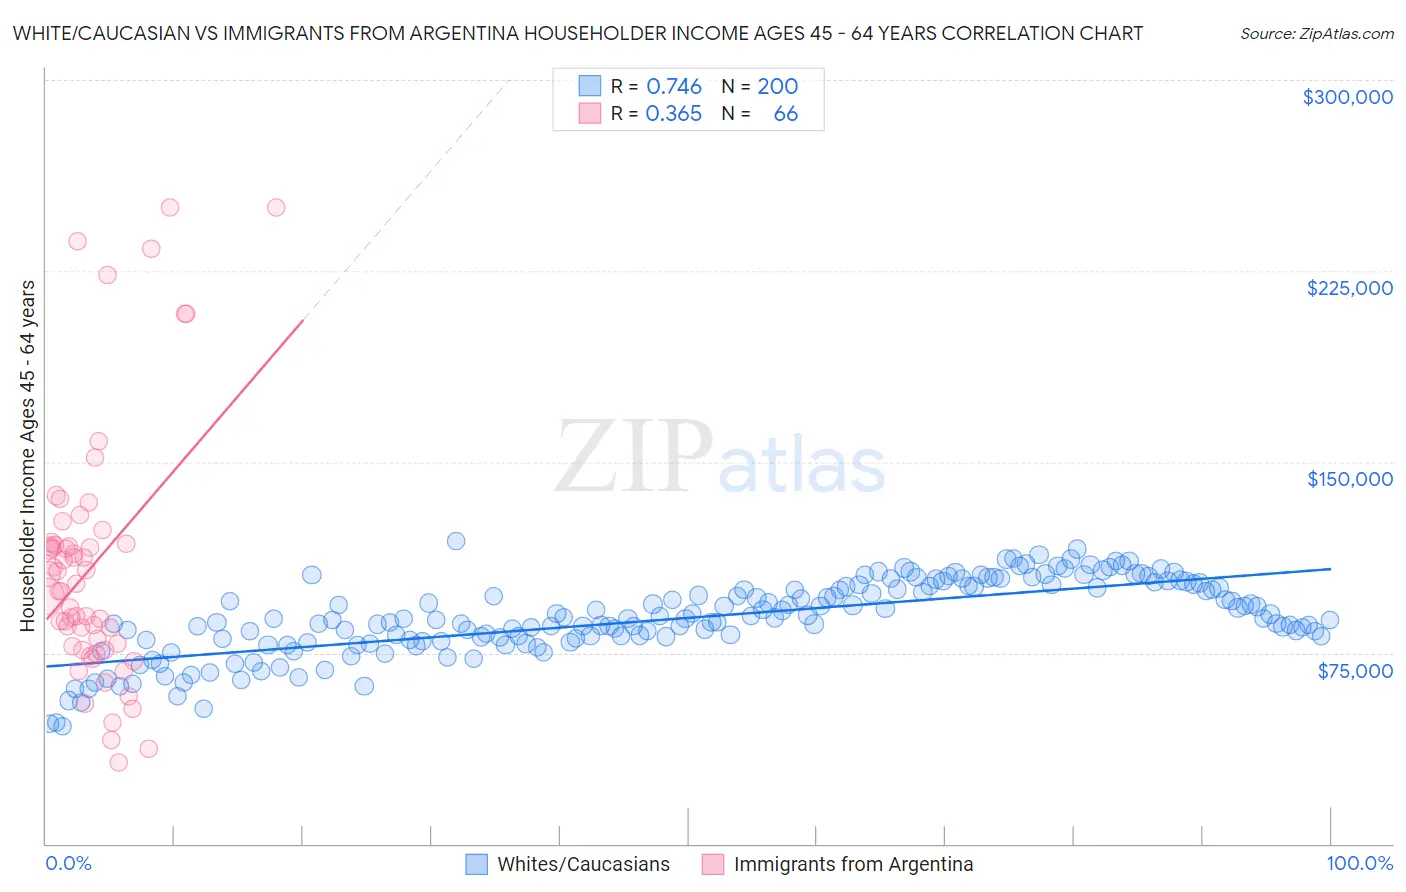 White/Caucasian vs Immigrants from Argentina Householder Income Ages 45 - 64 years